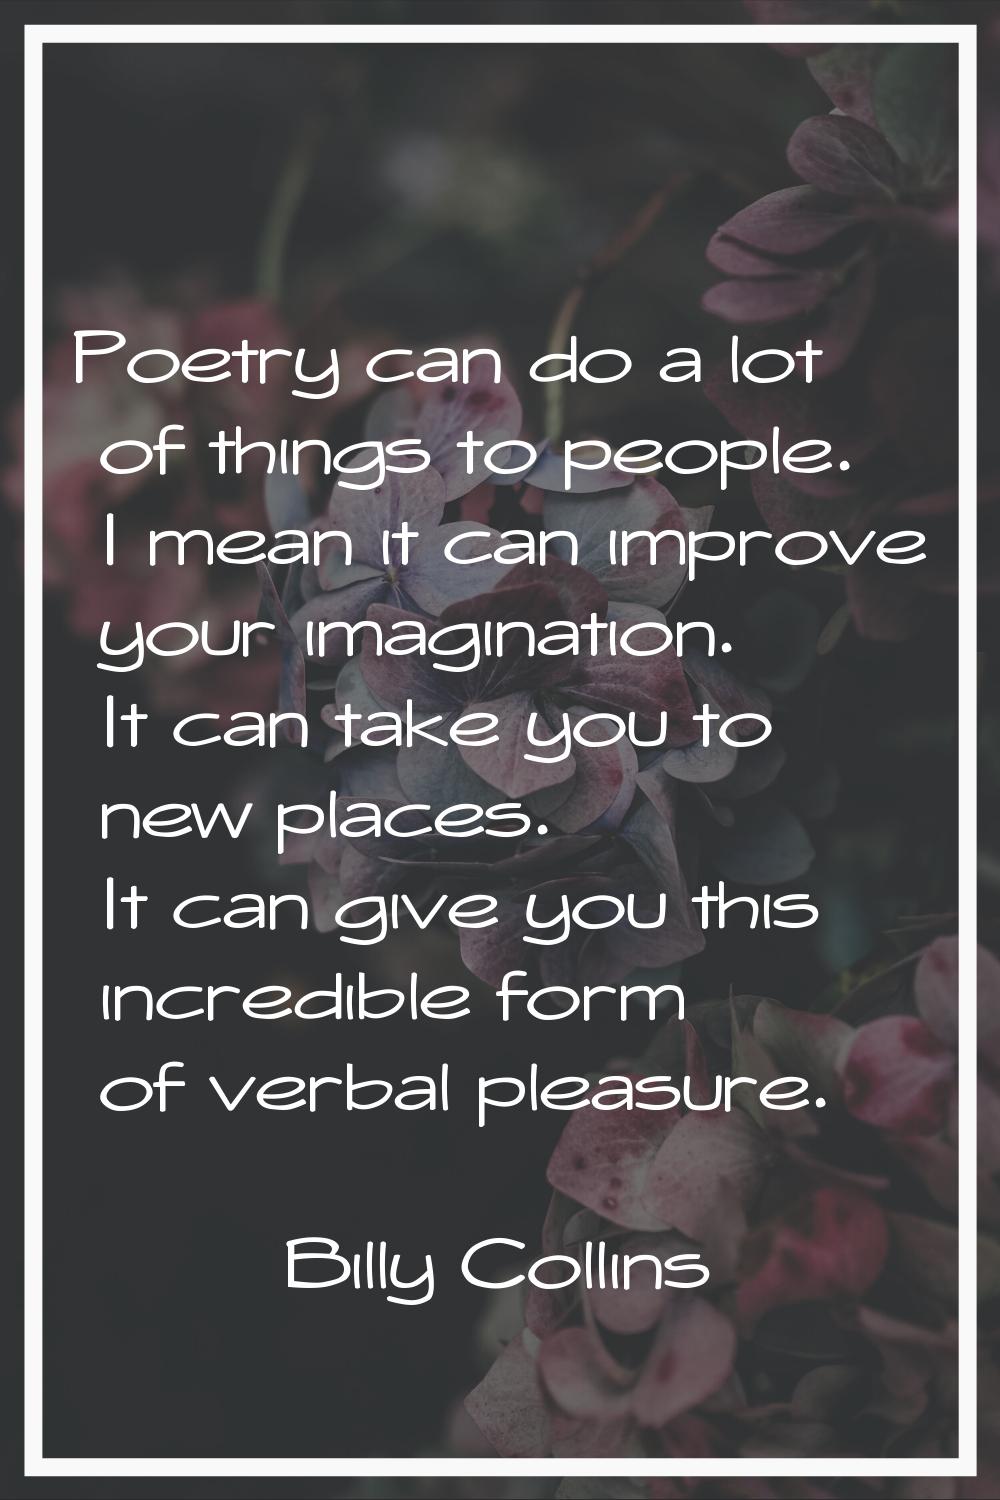 Poetry can do a lot of things to people. I mean it can improve your imagination. It can take you to